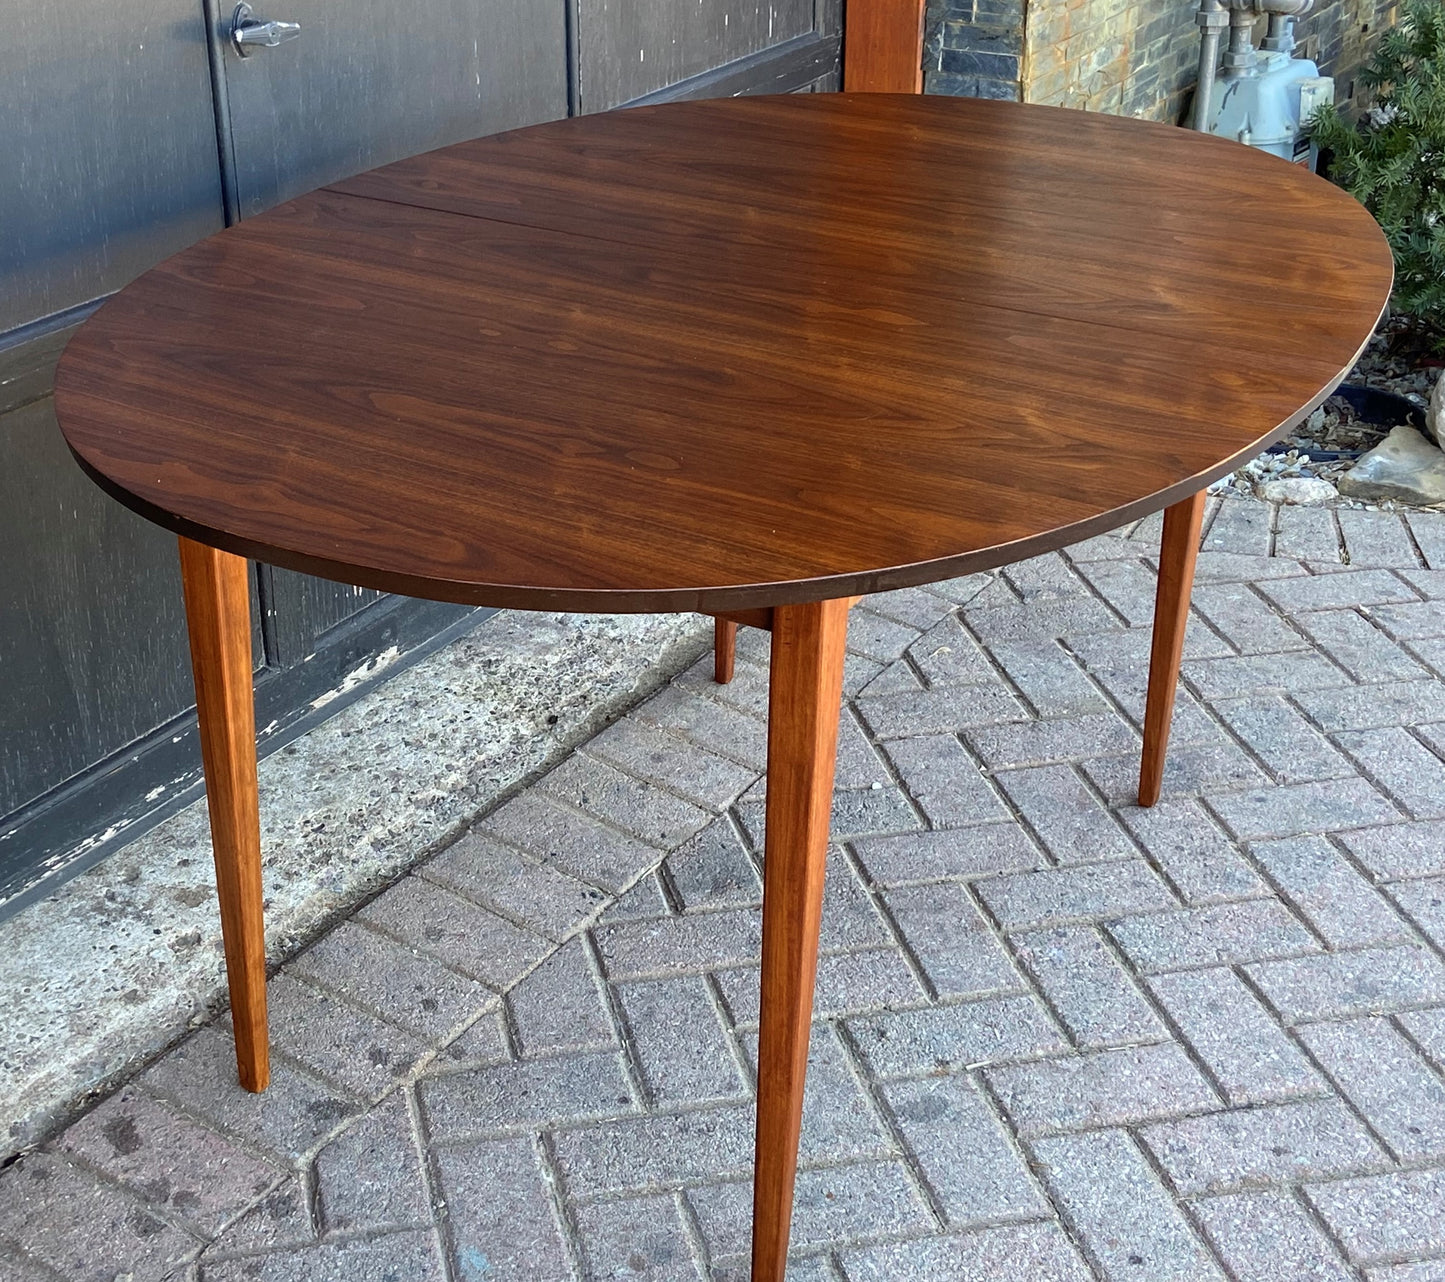 REFINISHED MCM Walnut Dining Table Oval w 2 leaves, 57"- 92" PERFECT